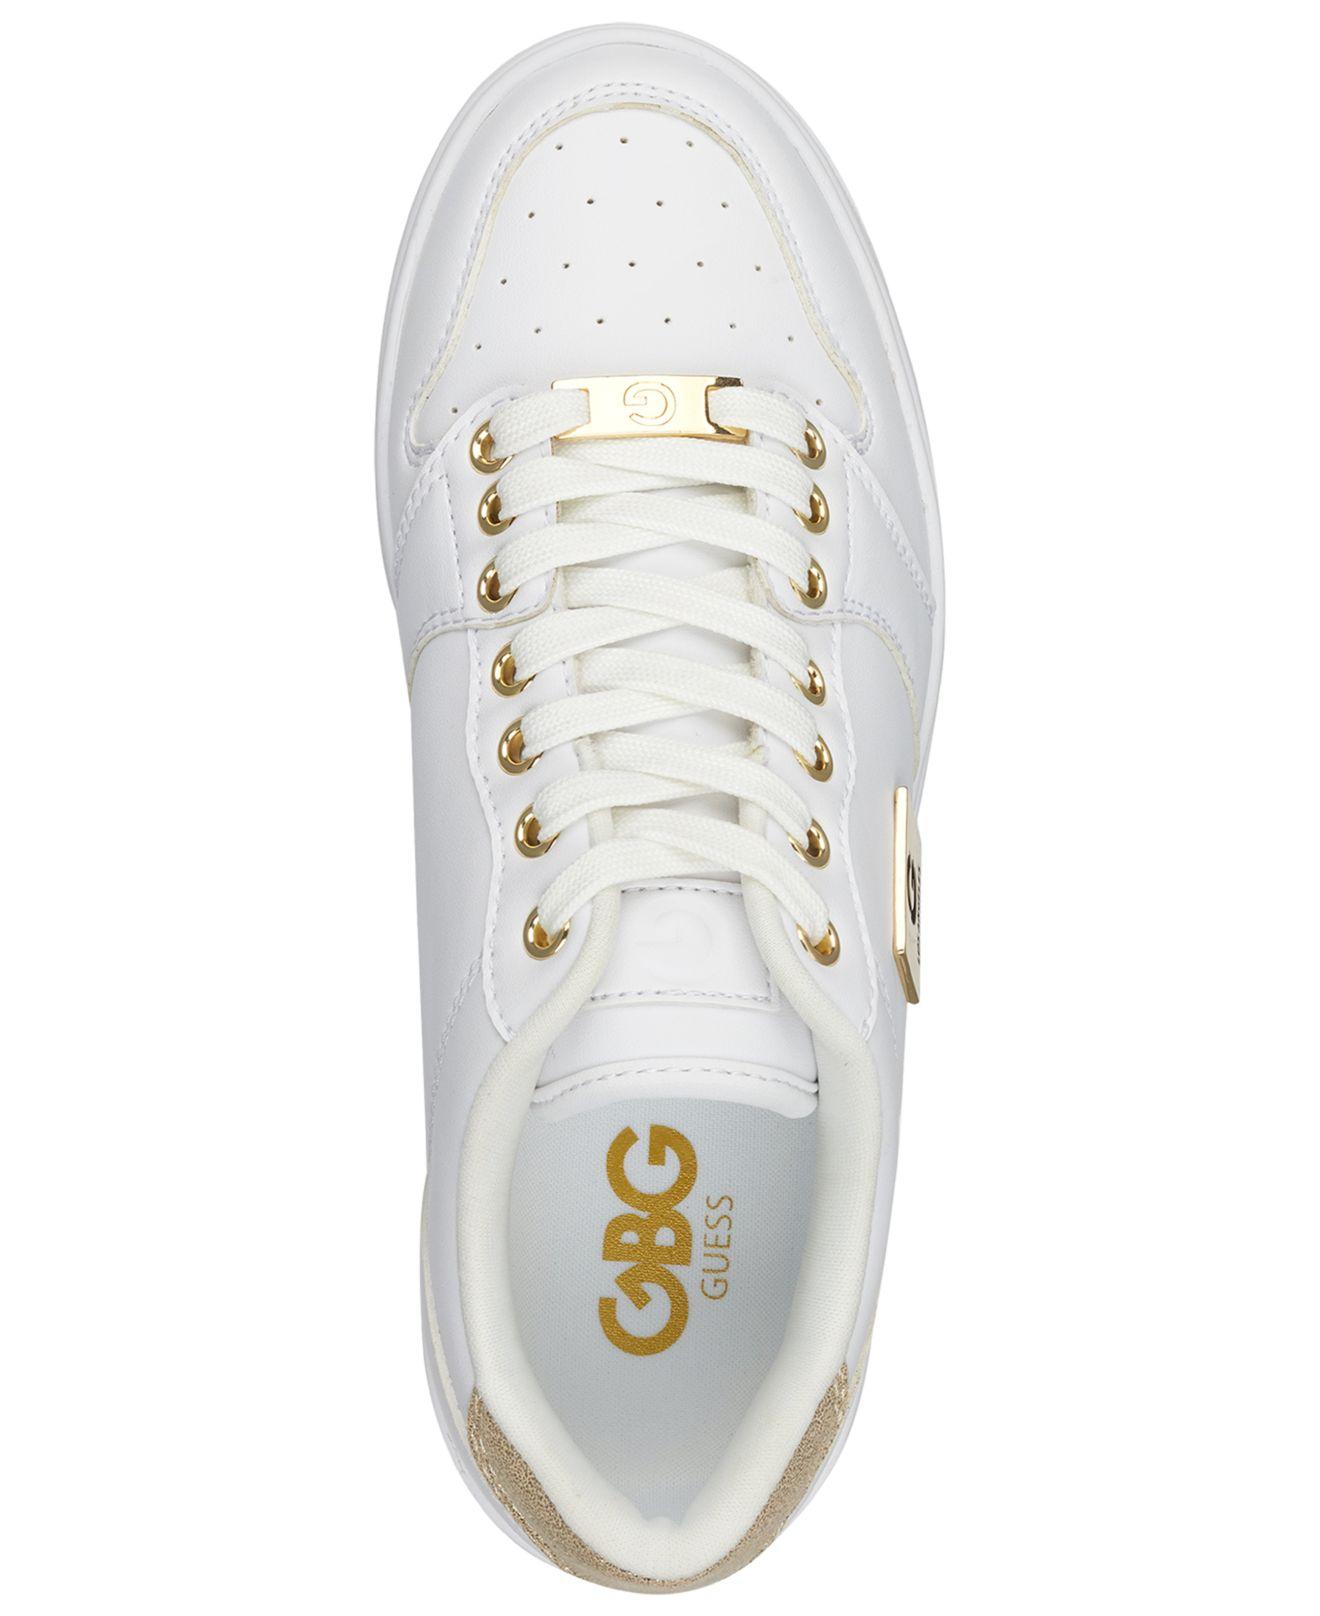 G by Guess Gbg Los Angeles Rigster Wedge Sneakers in White | Lyst